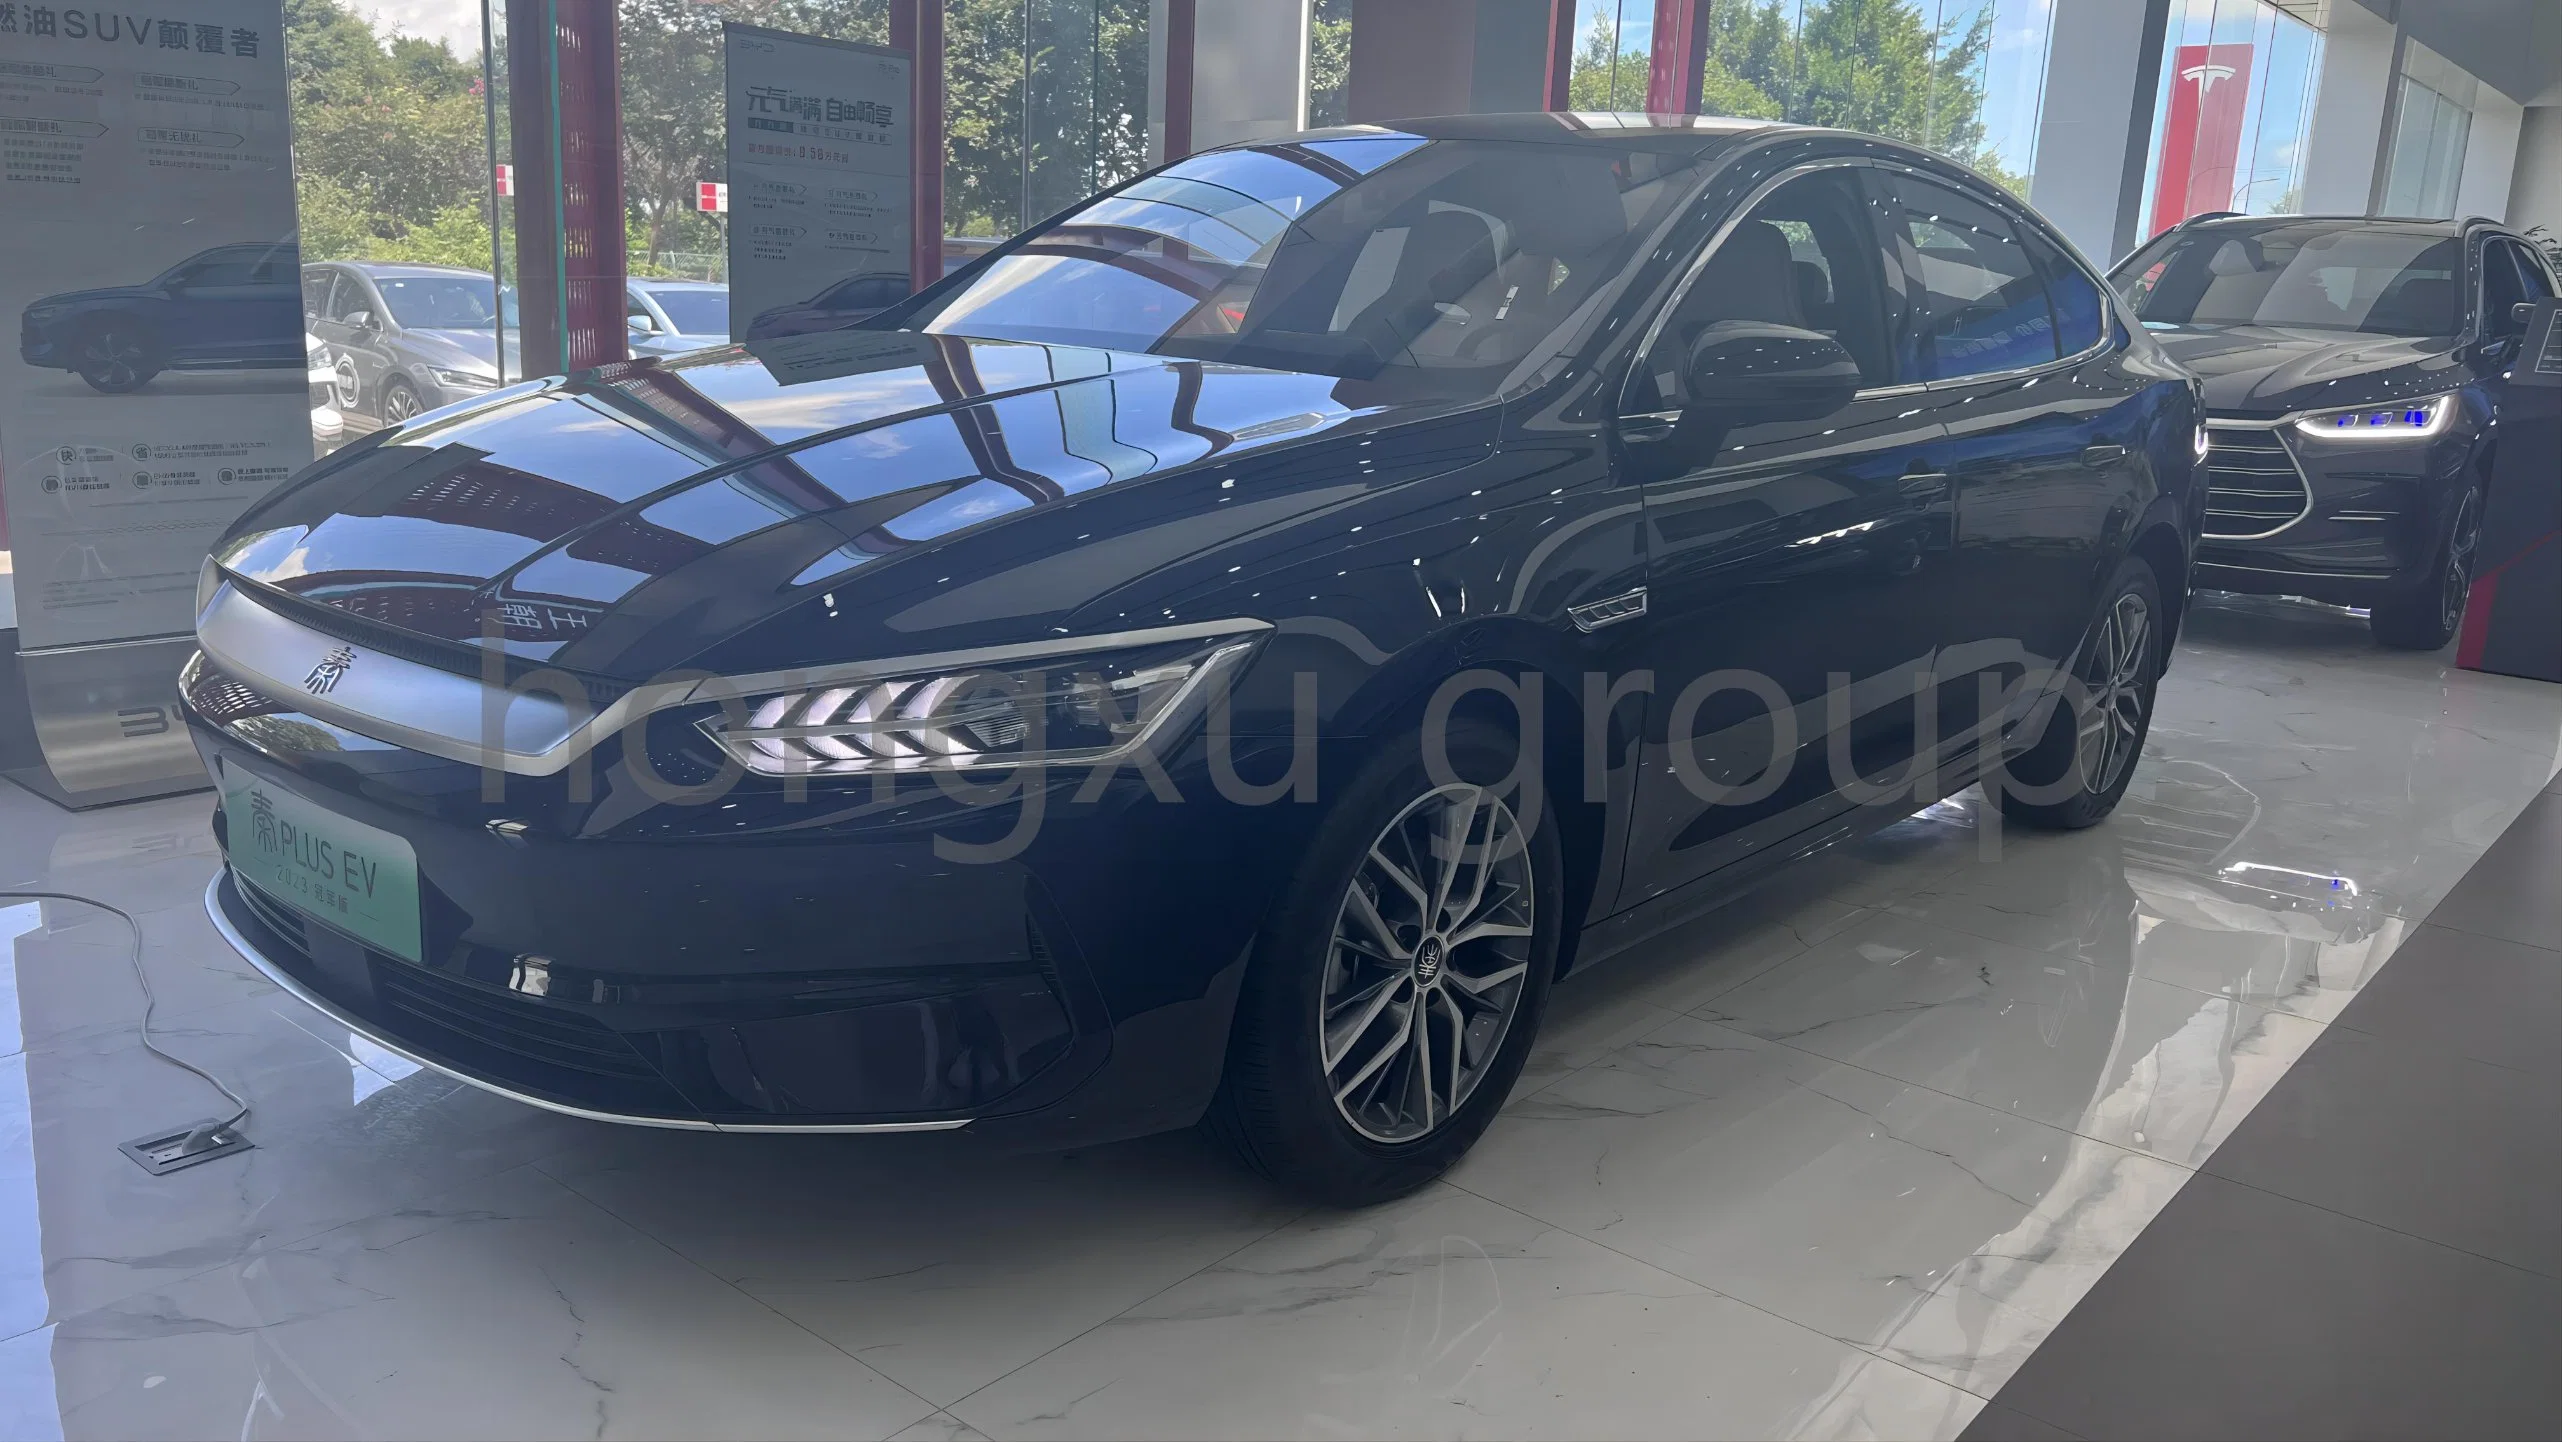 Byd Qin Plus EV Champion 510km Chinese EV Cars with Long Range Electric Car 5 Seats Sedan New Second Hand Electric Vehicle Taxi Car Used Electric Car Auto Car